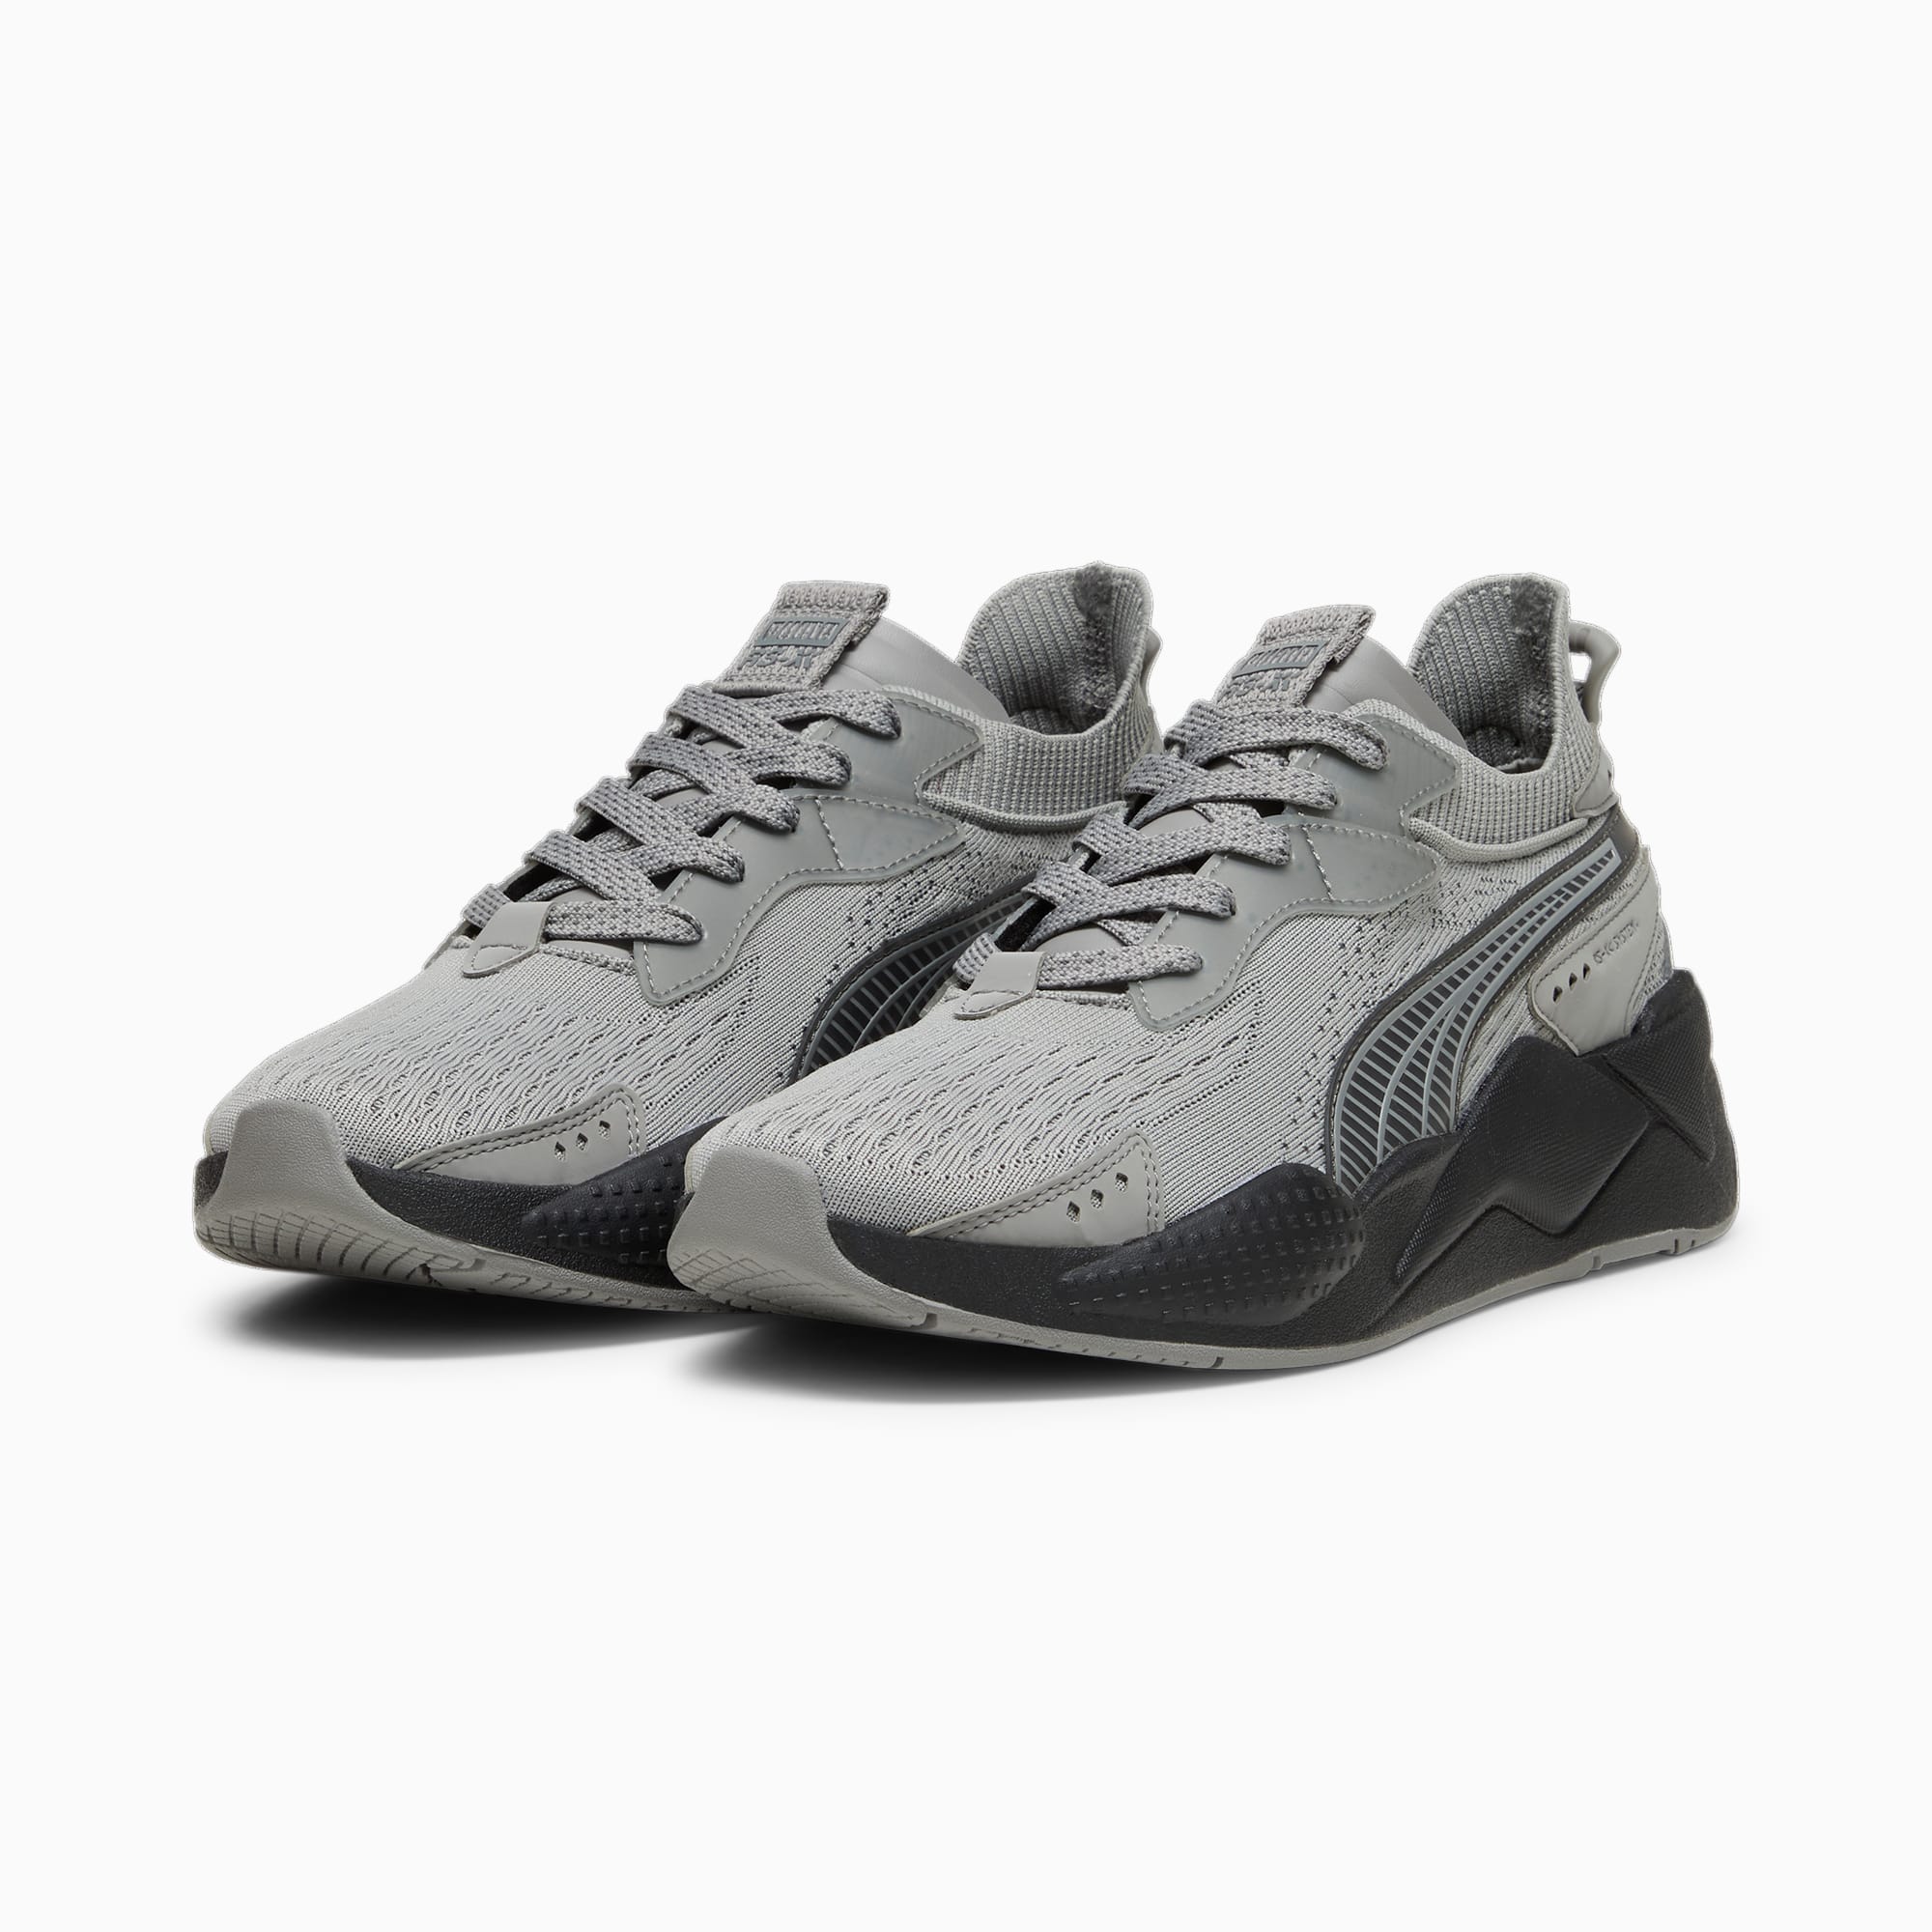 Women's PUMA Rs-Xk Remix Sneakers, Stormy Slate/Shadow Grey, Size 35,5, Shoes